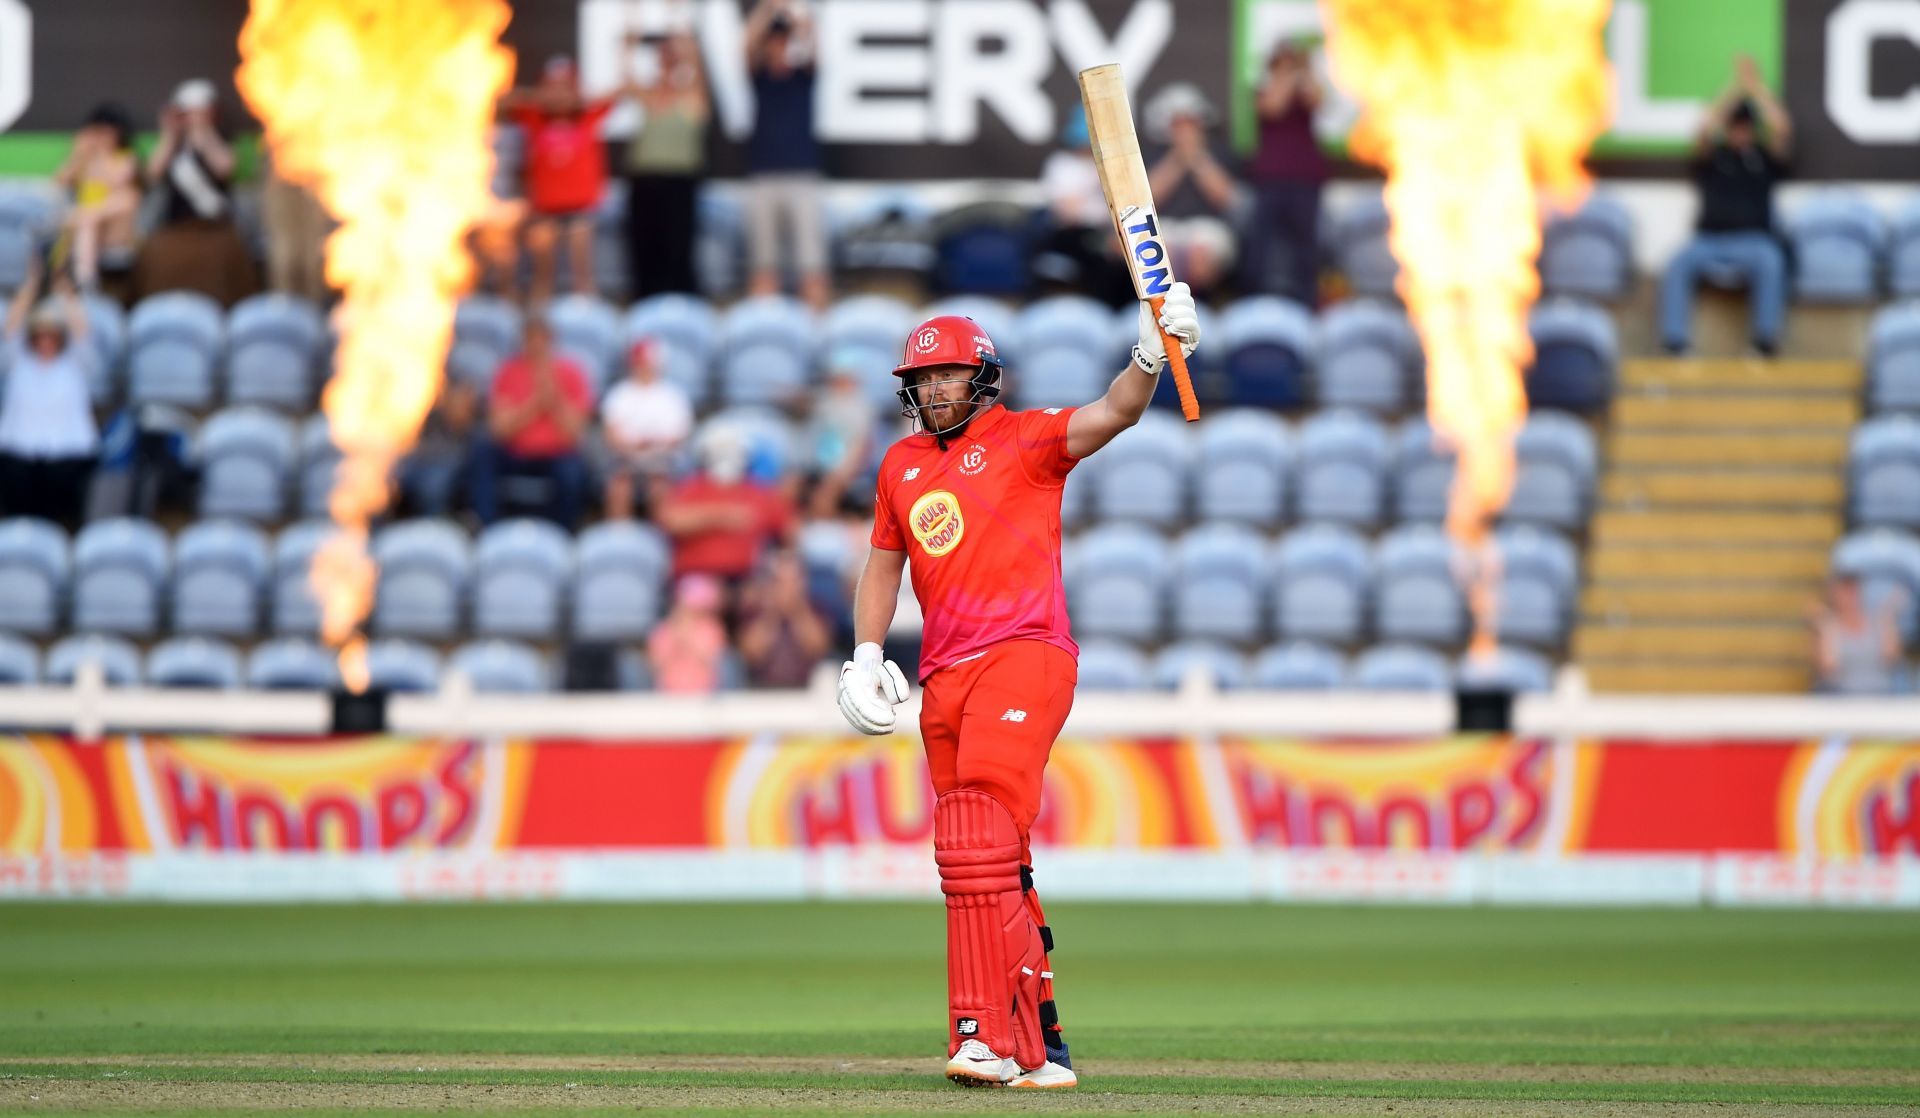 Jonny Bairstow raises his bat while playing for Welsh Fire. (Credits: Getty)